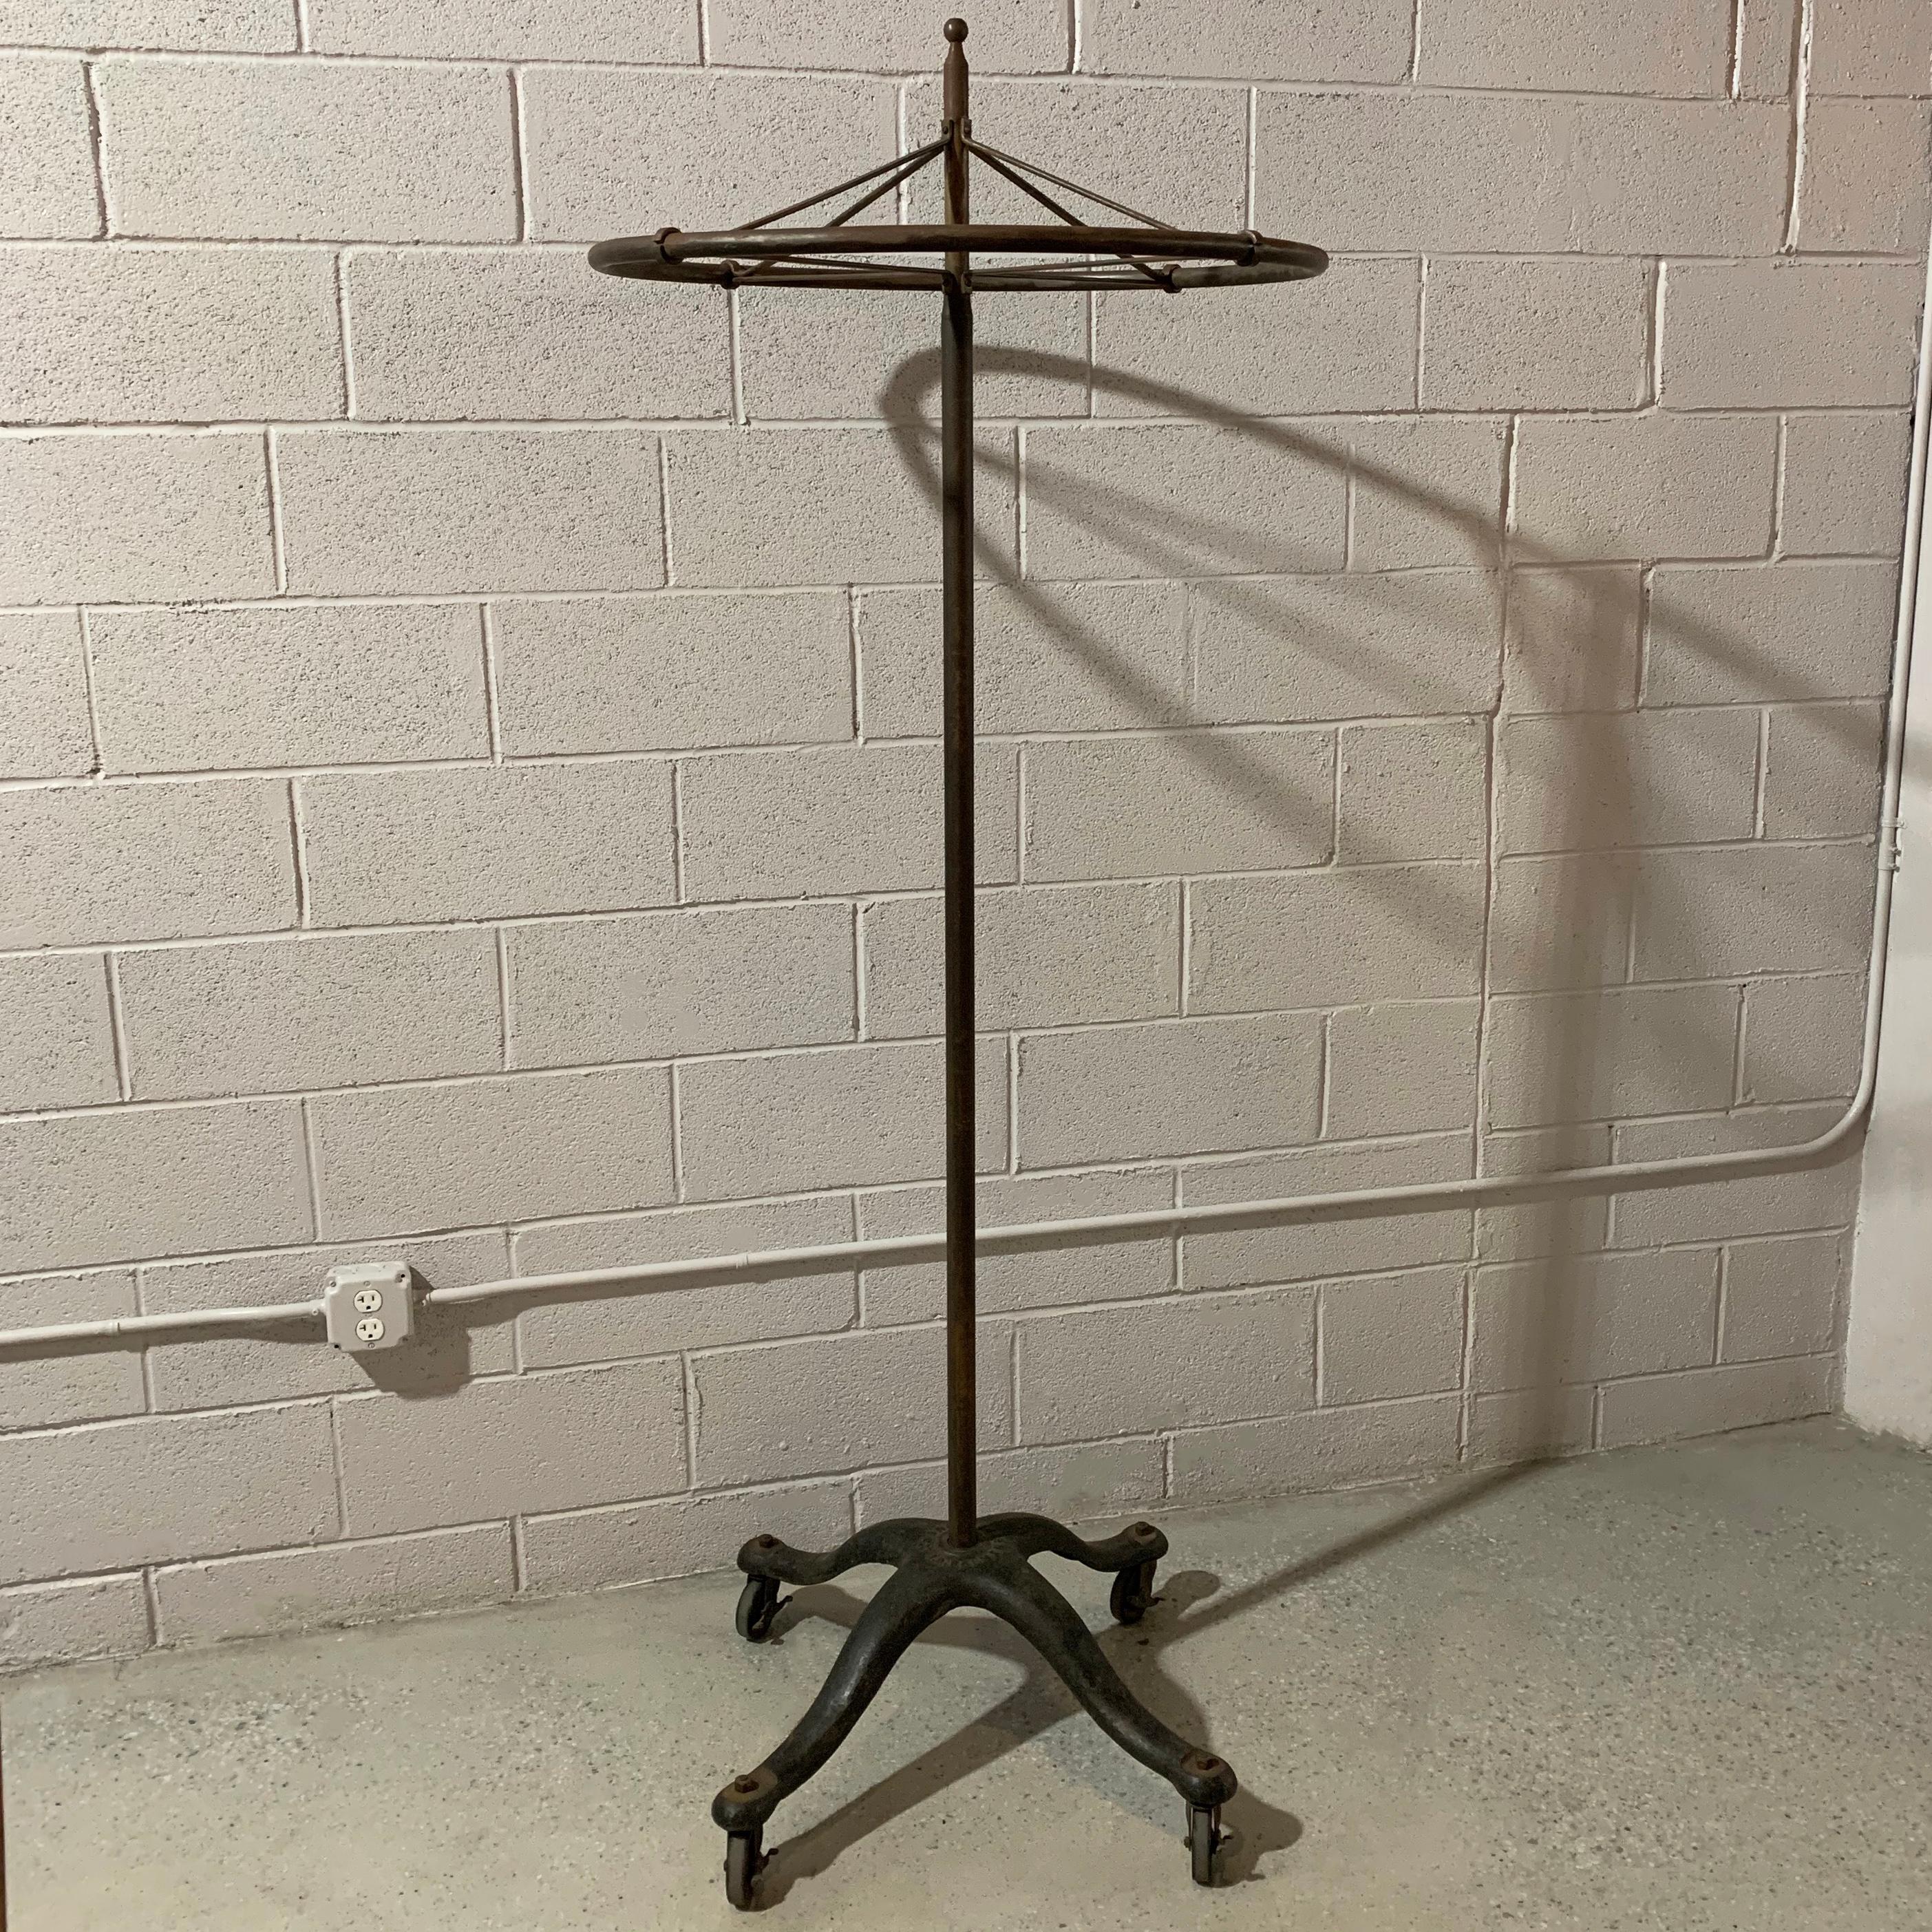 Early 20th century, rounder, garment display rack by J.R. Palmenberg's Sons NY features a rolling cast iron base with steel pole and rotating 29 inch diameter carousel.